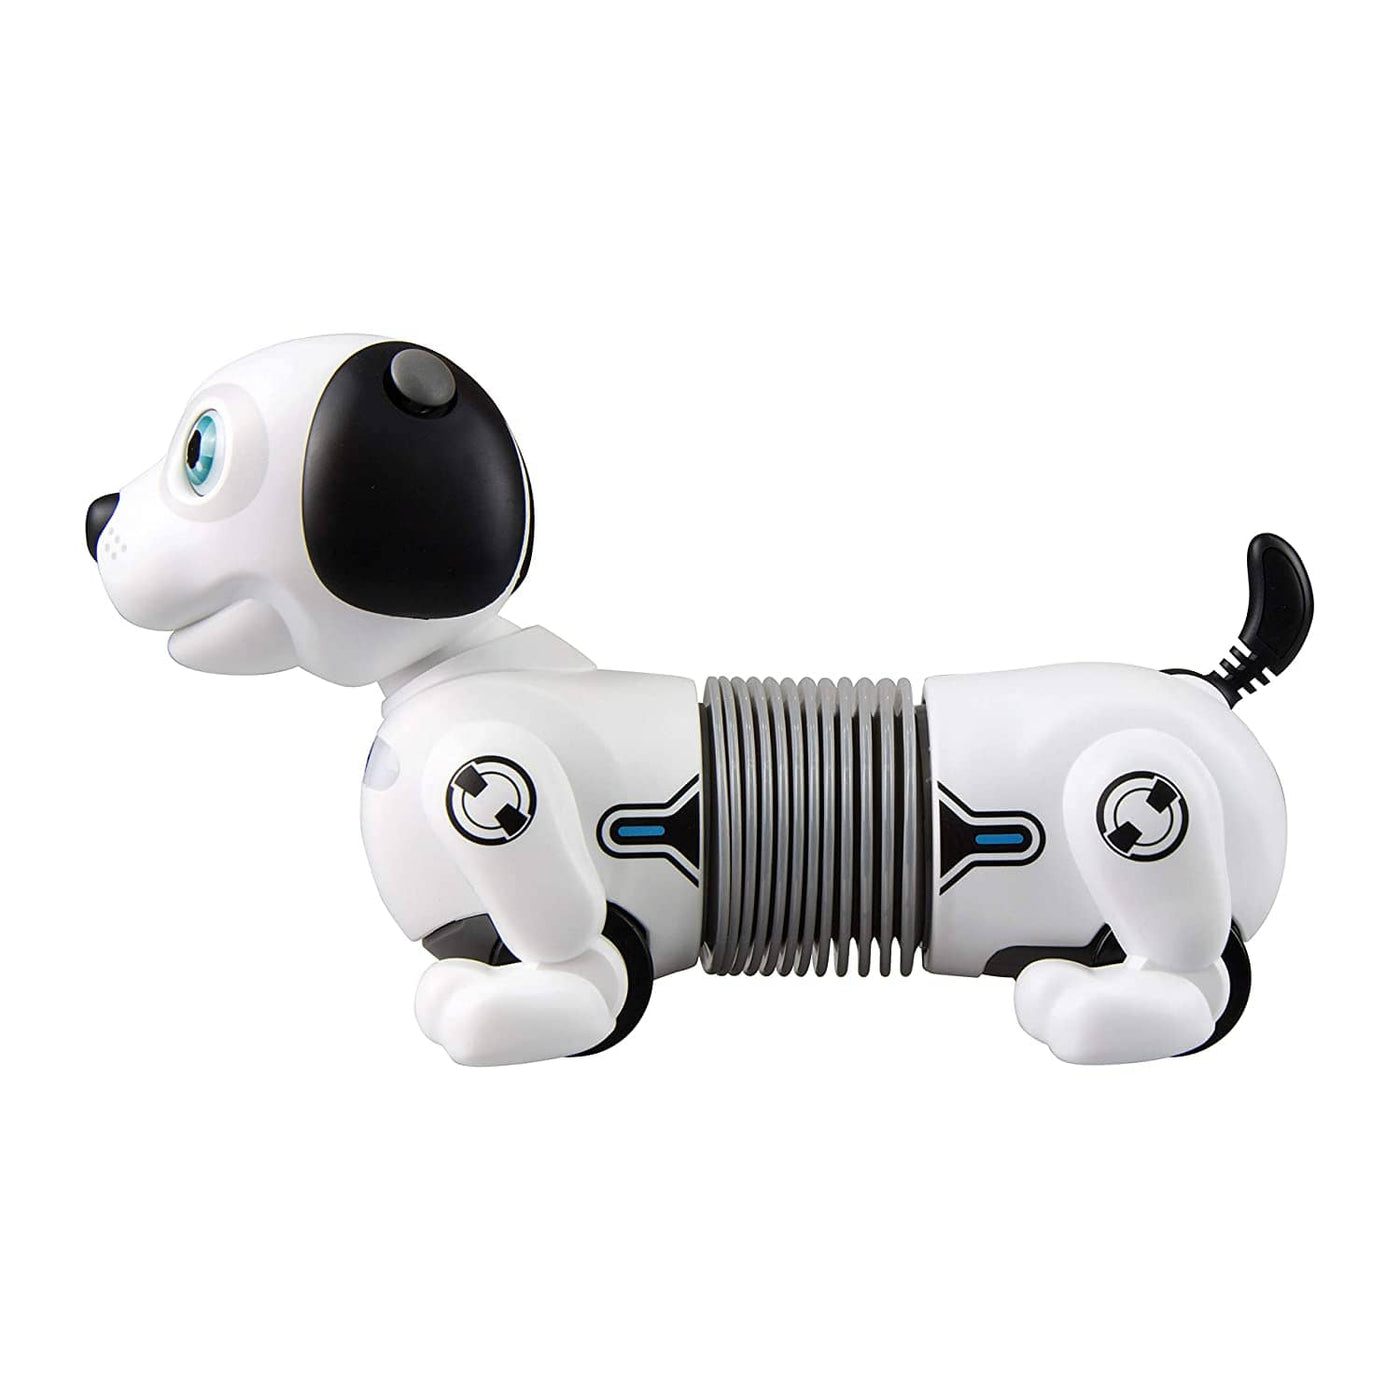 YCOO Robo Dackel Jr Interactive Robotic Puppy with Gesture Control; Remote Included by Silverlit Toys Hong Kong Toy